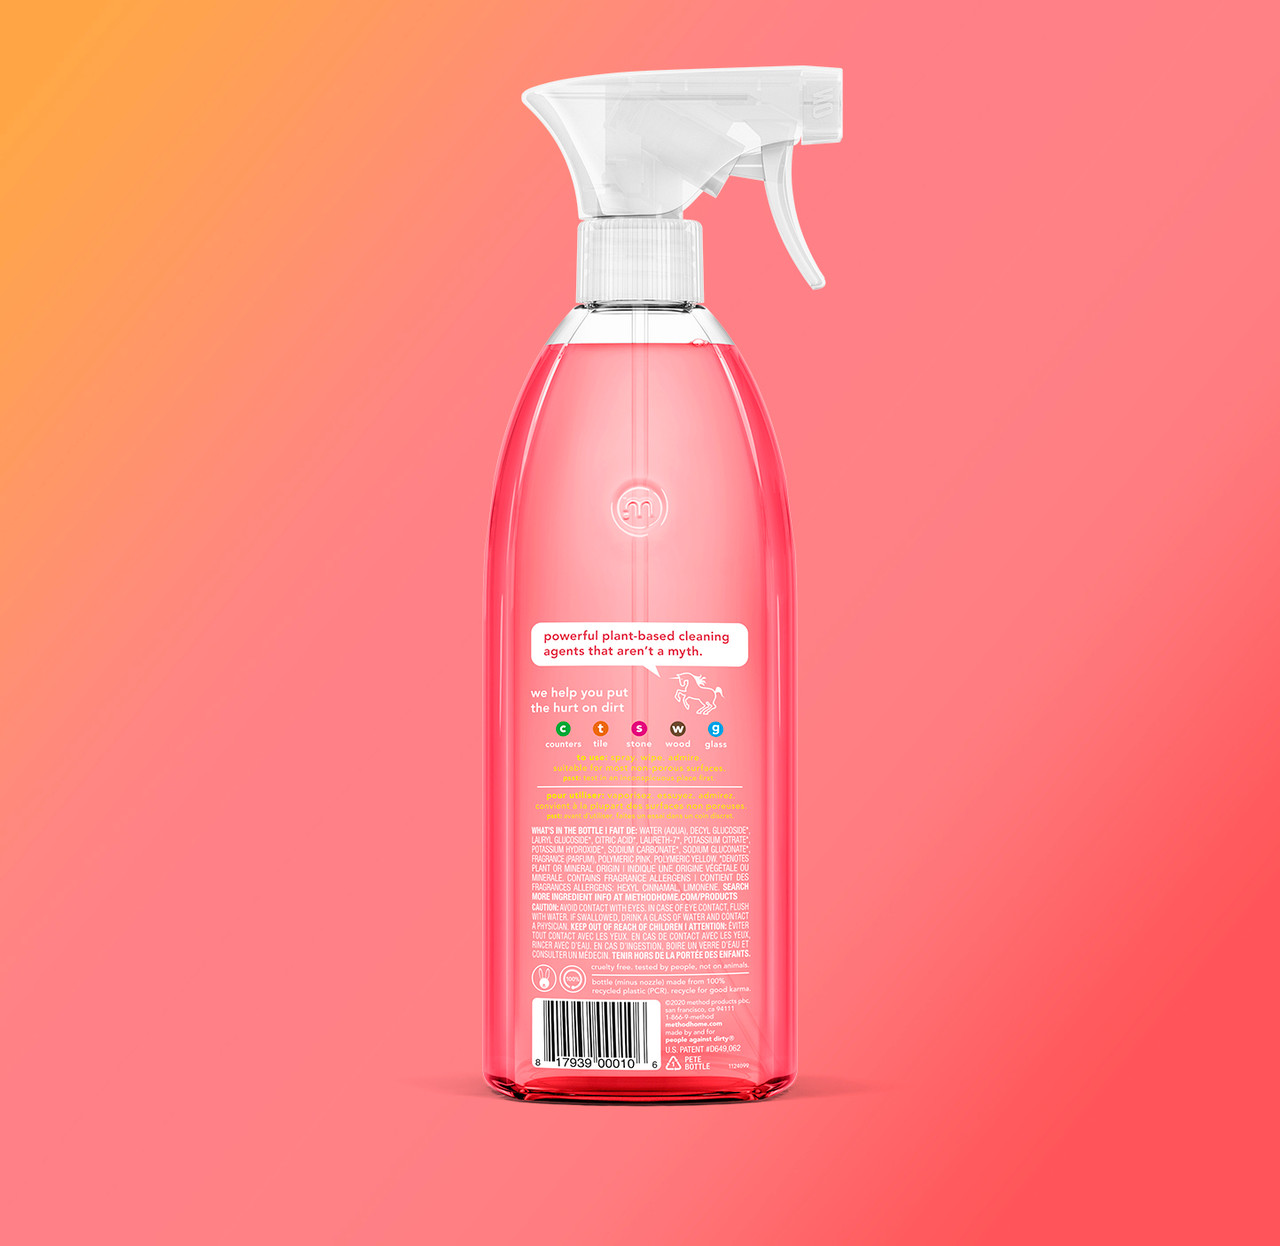 On Wednesdays, we clean PINK! Our trusty, Multi-purpose spray